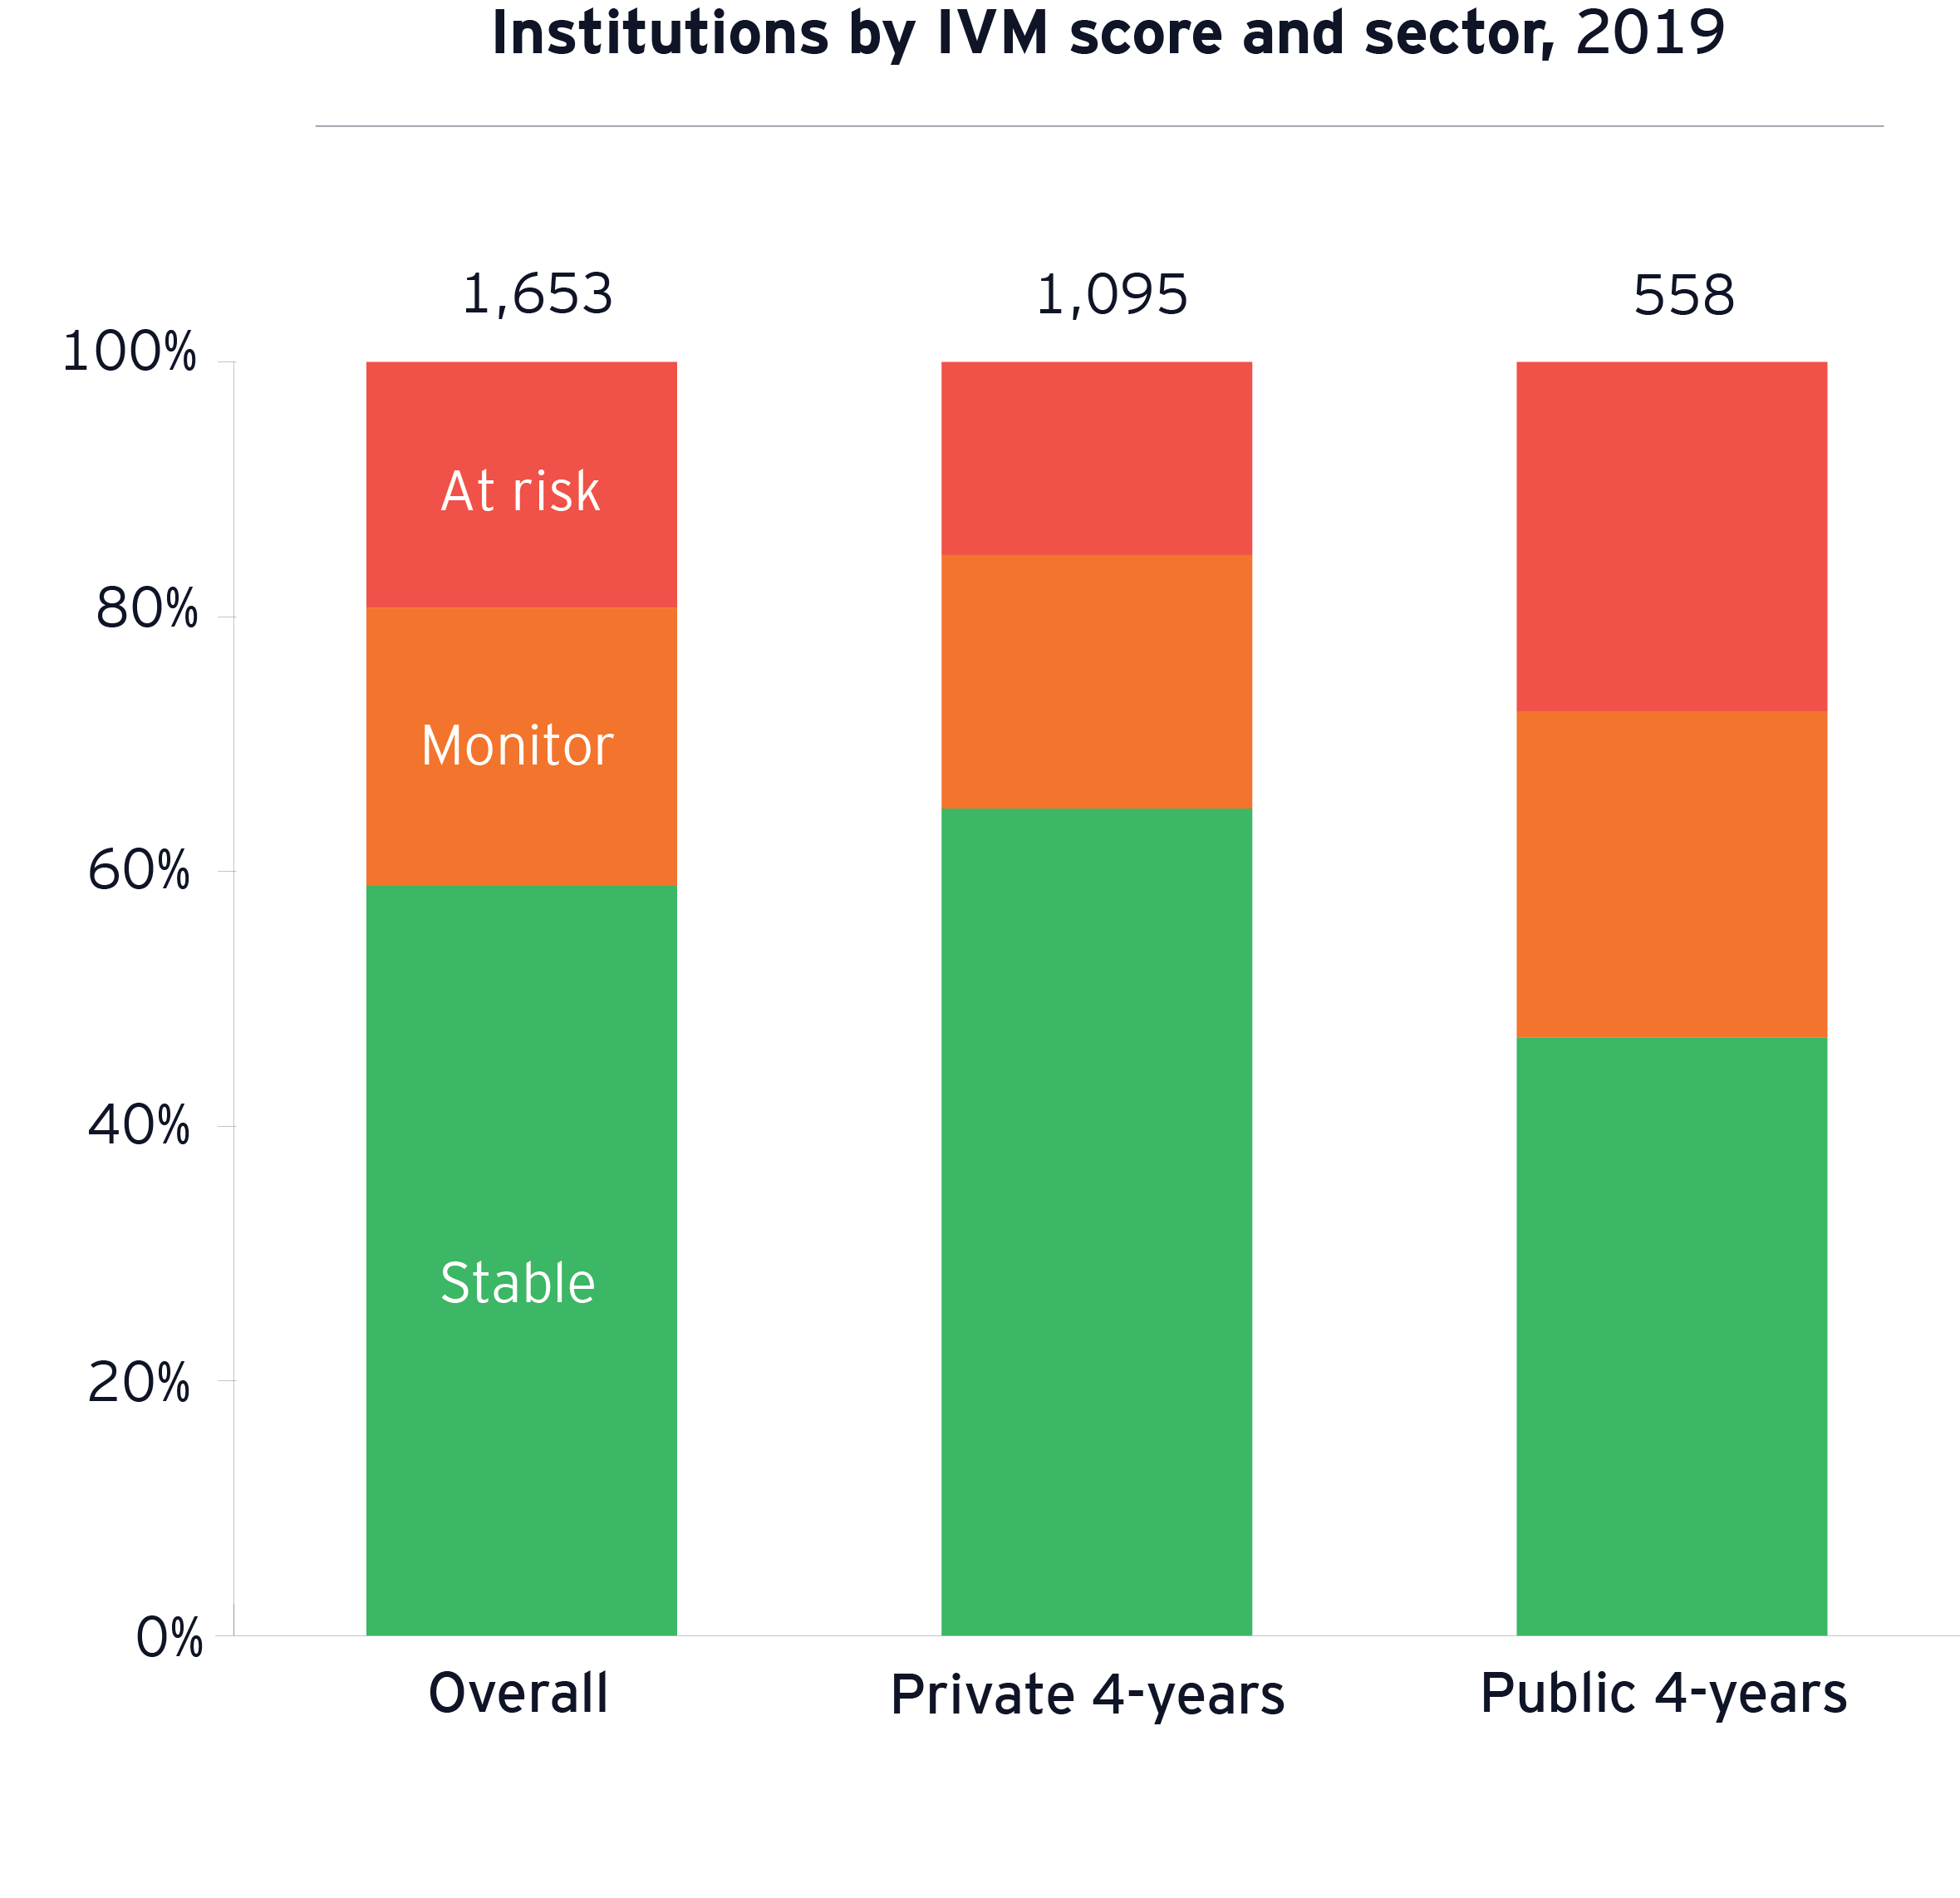 Institutions by IVM score and sector, 2019 